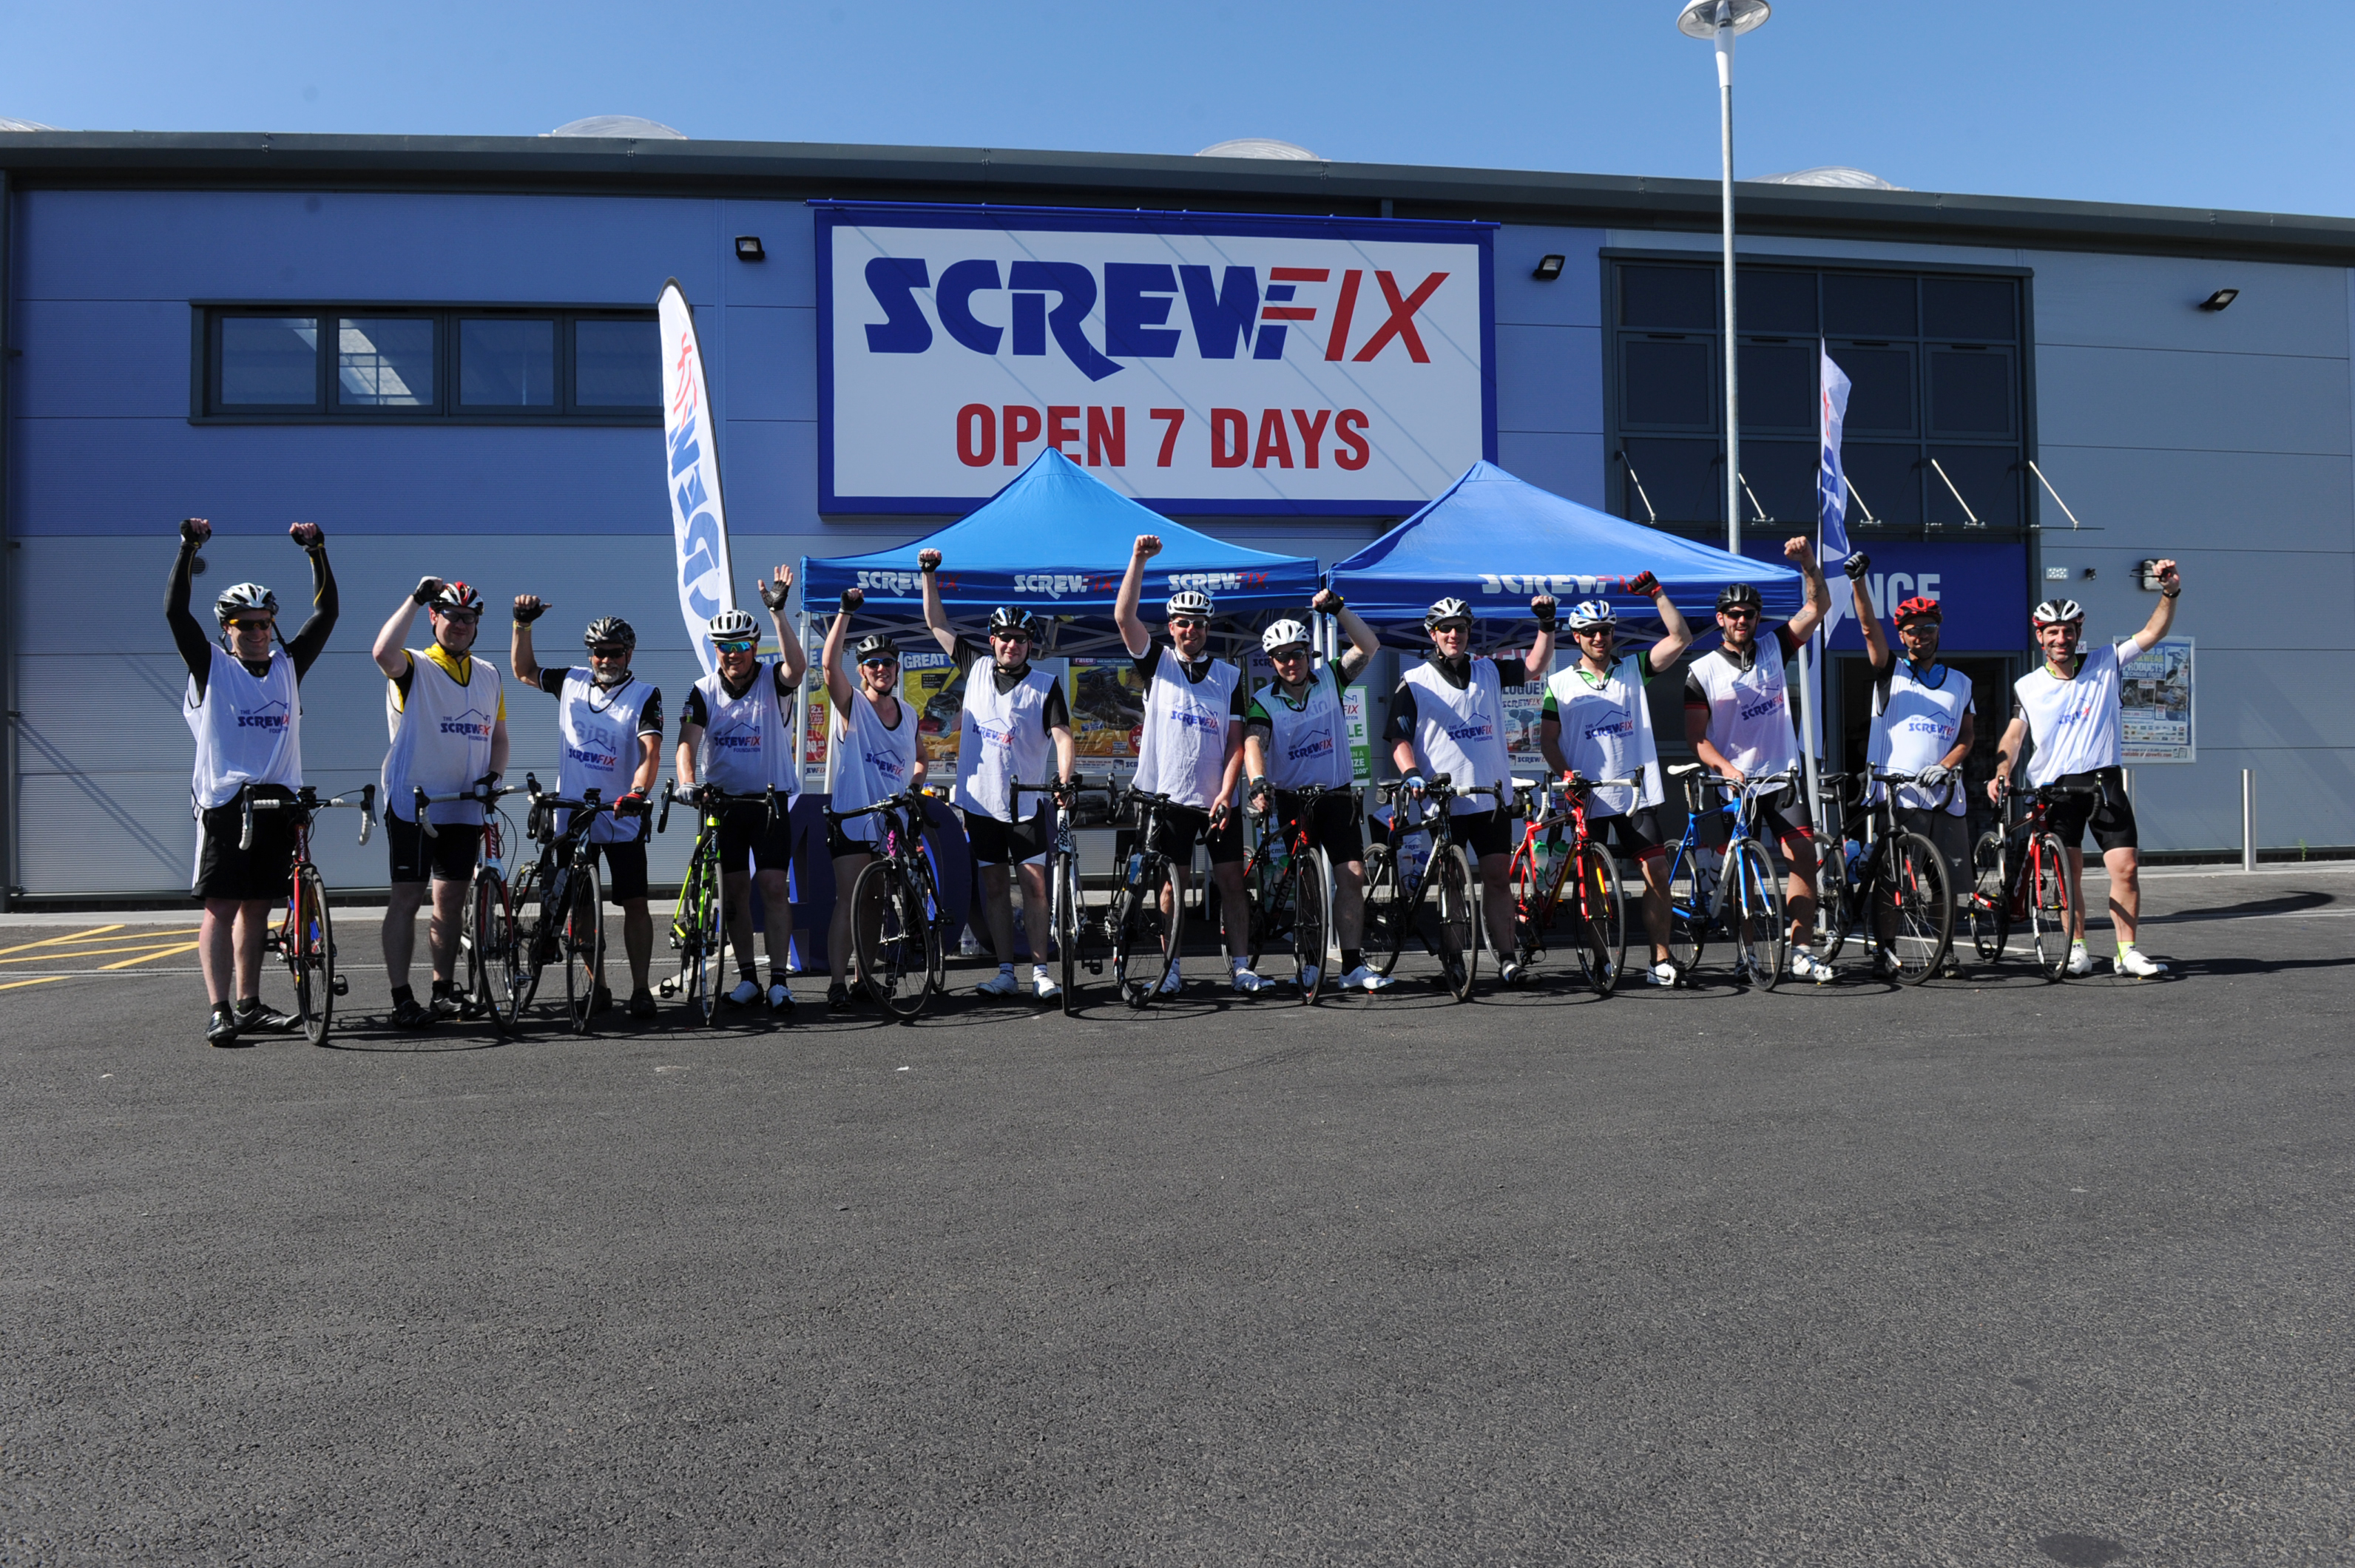 The Screwfix Foundation raises £1,000,000 for charity